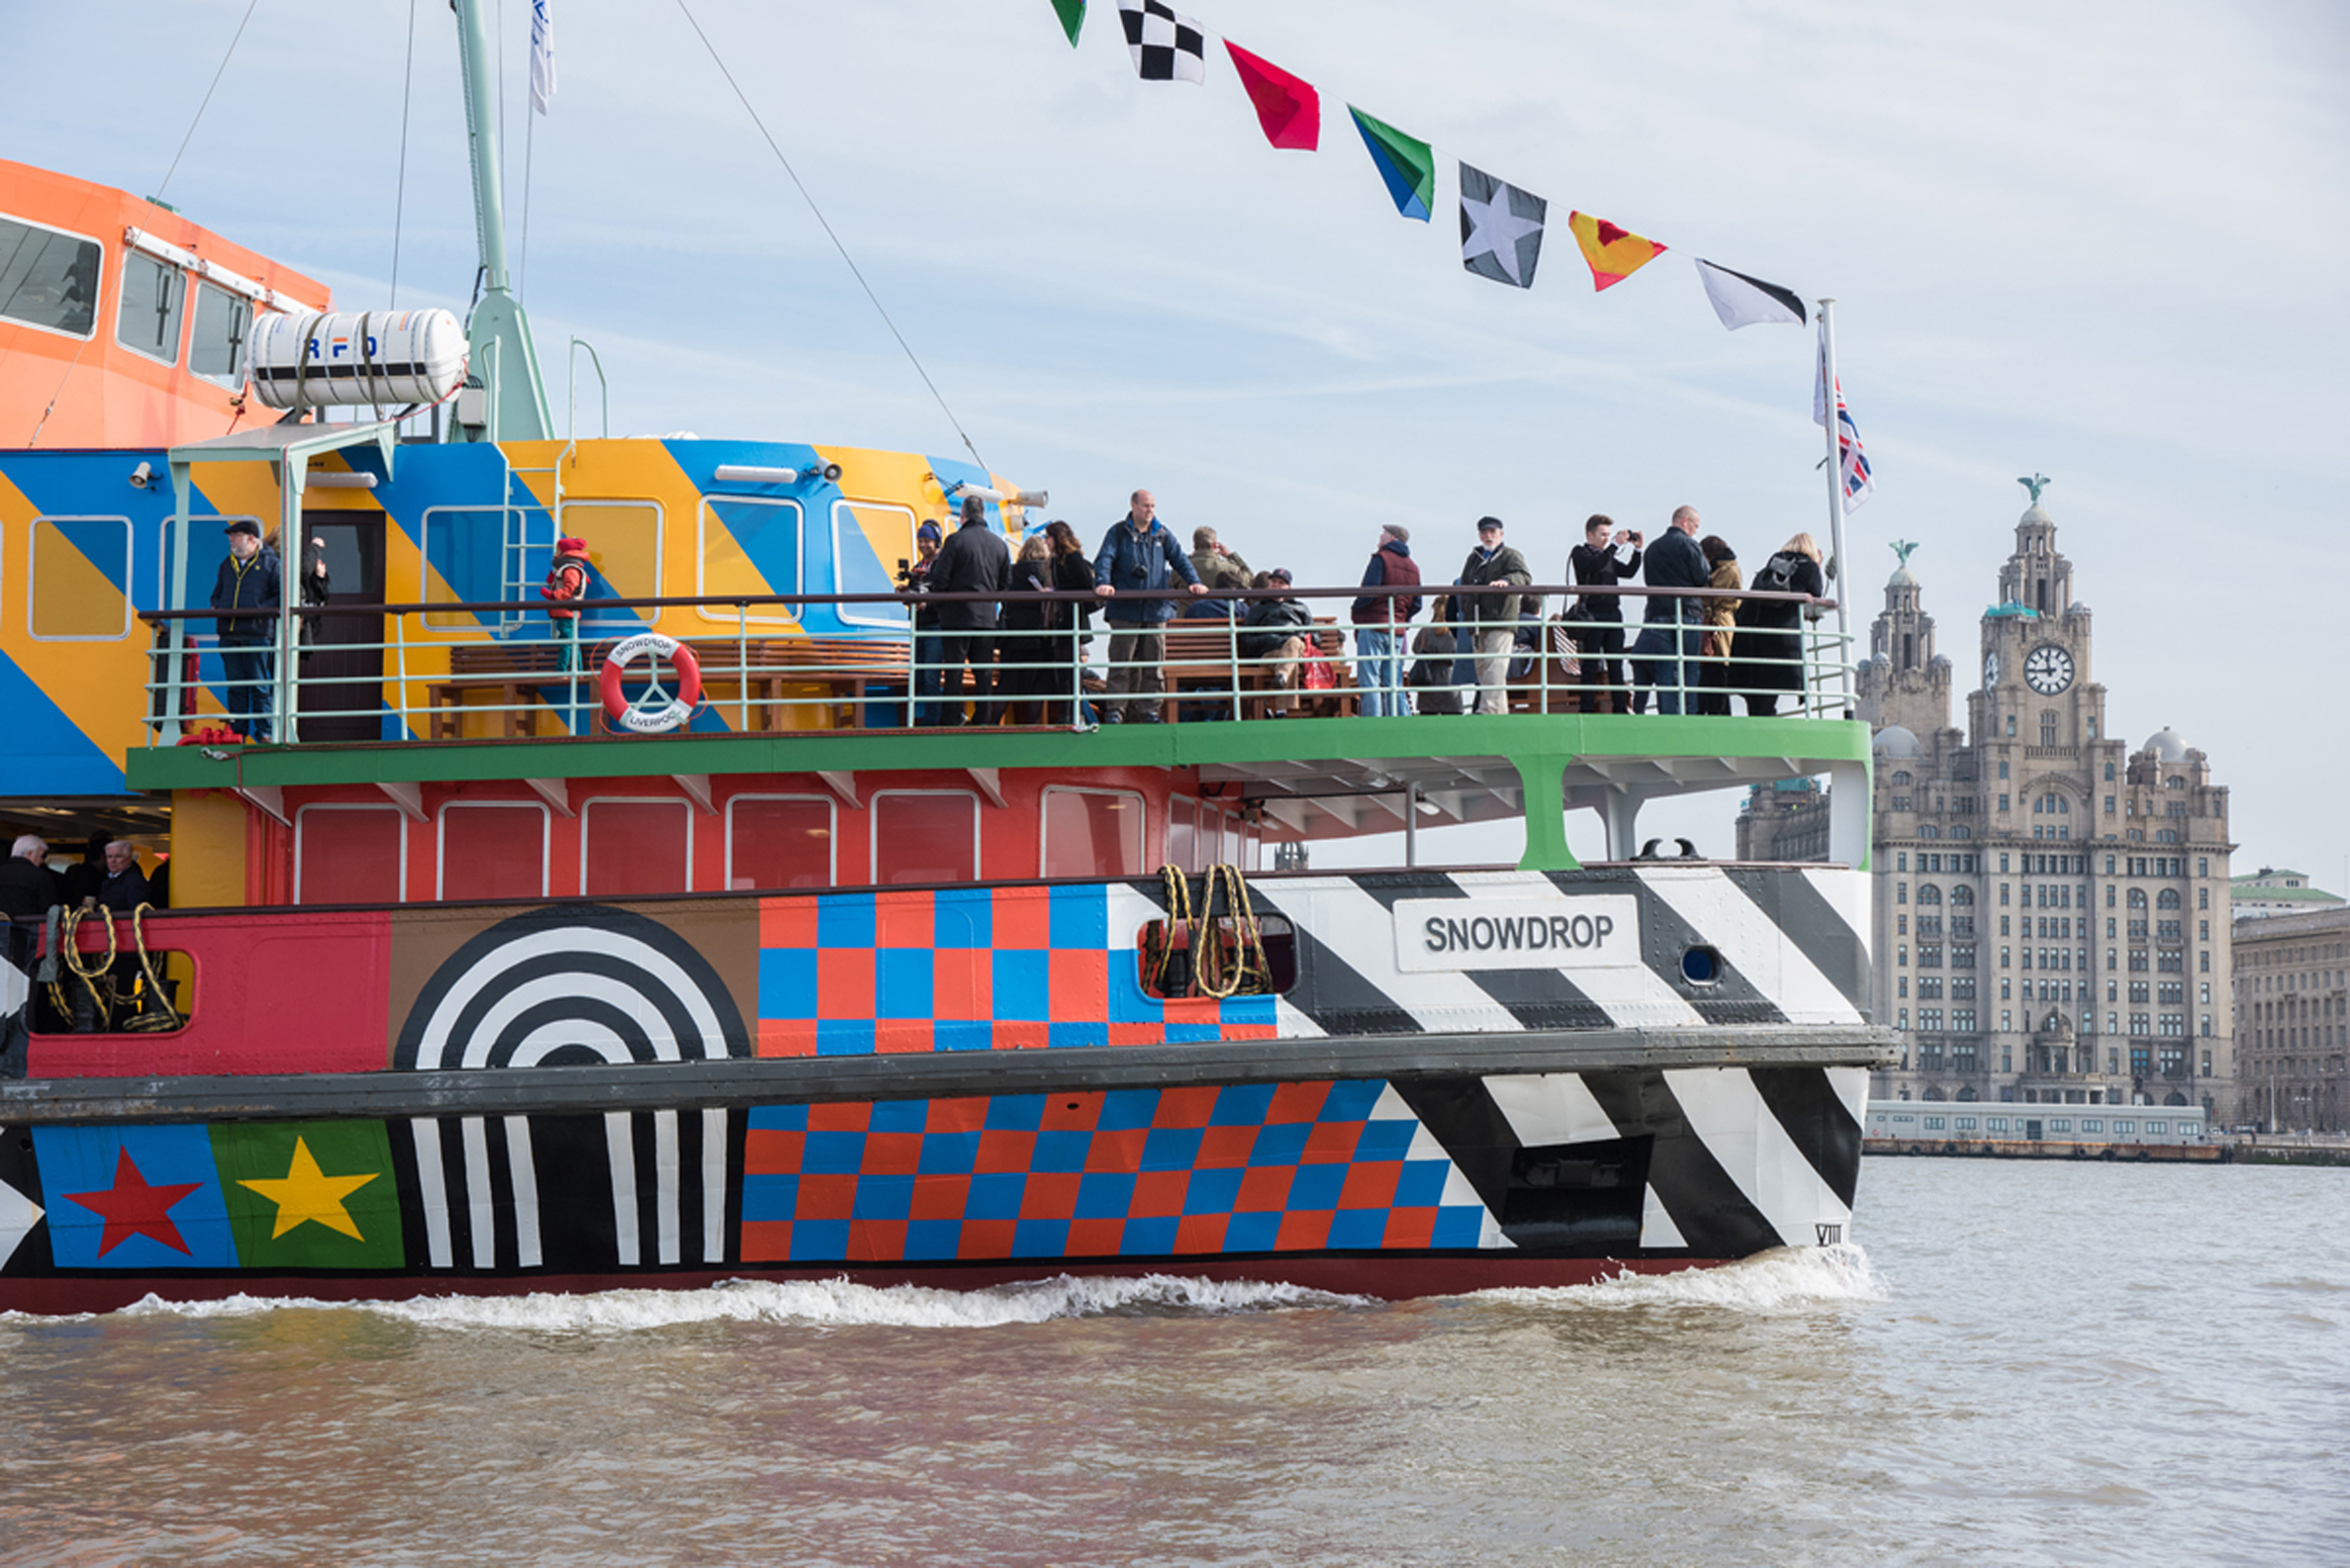 A colouful patterned ferry sailing across the River Mersey. There are people on the balcony looking out and you can see the Royal Liver Building in the distance